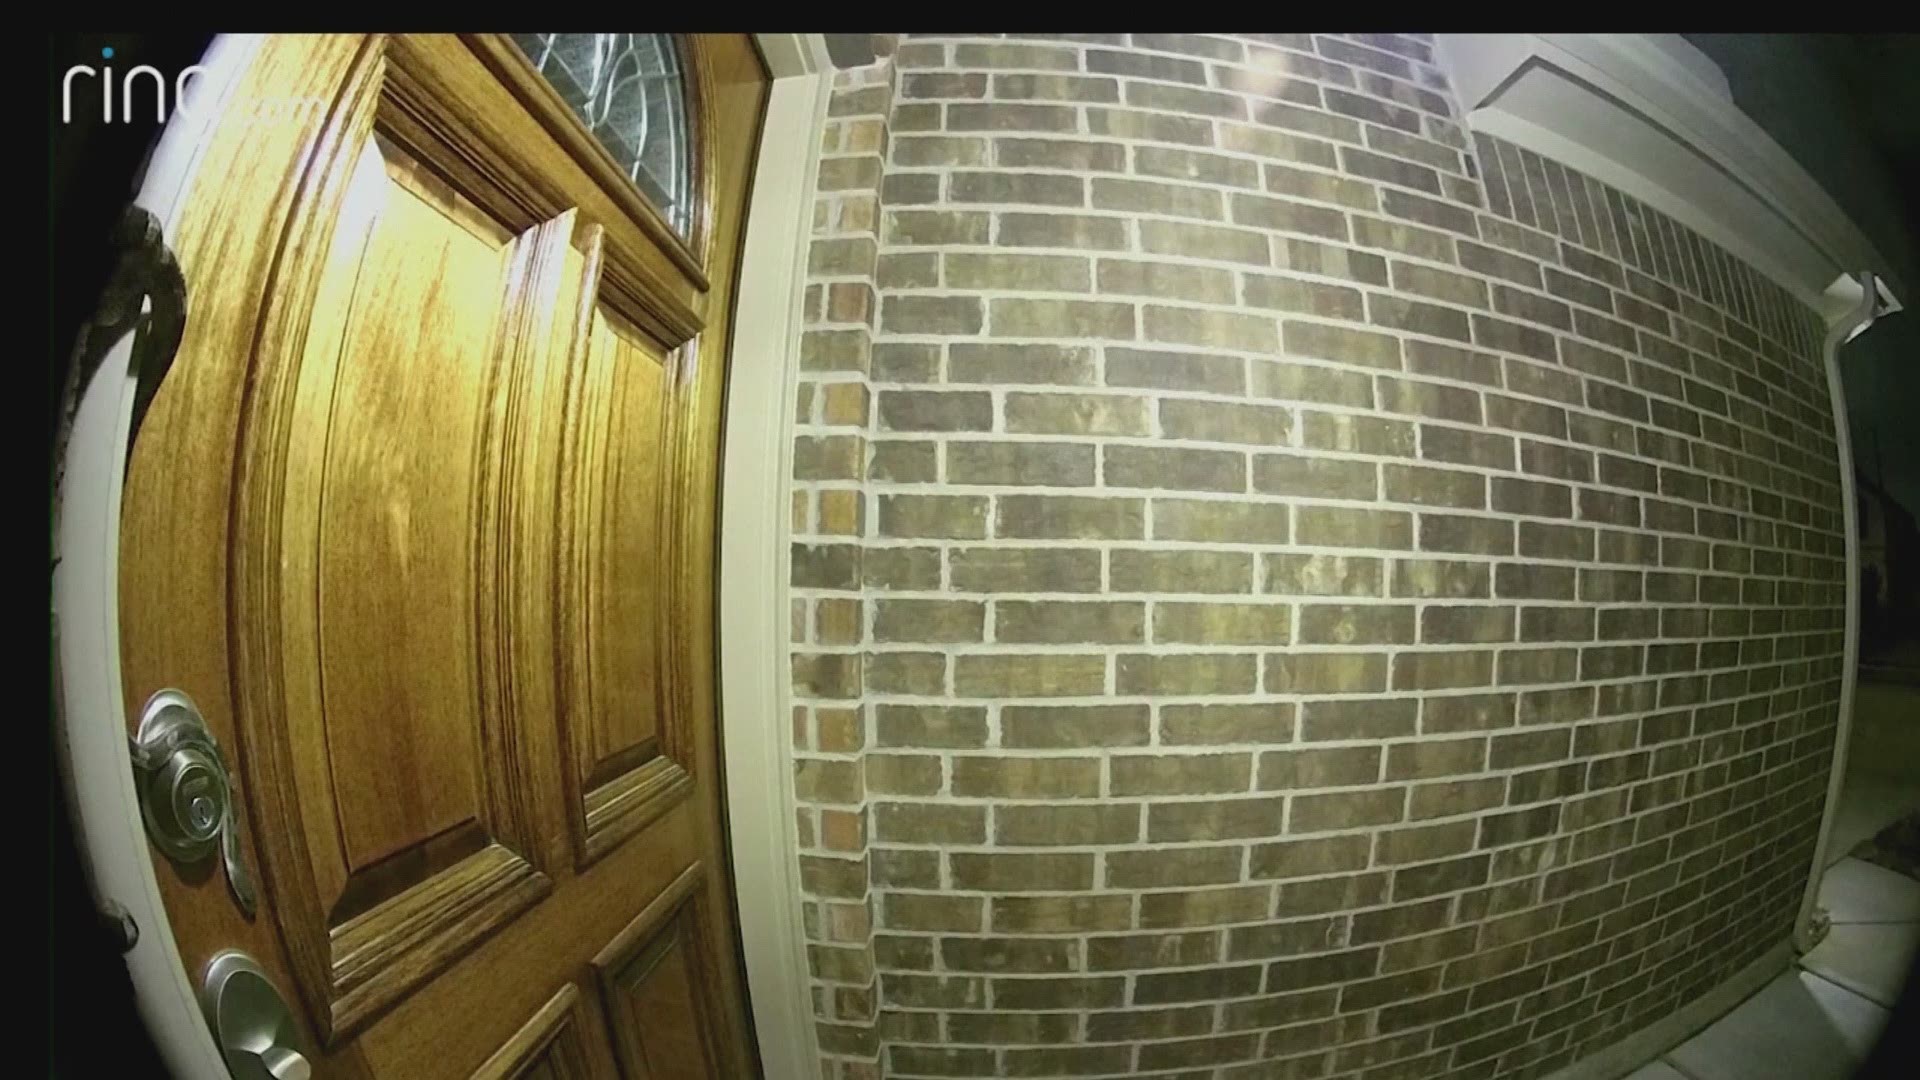 It's always a little unnerving when you get an alert at 2 a.m. that someone is at your door.  But Allison Keller wasn't ready for what she saw when she checked her doorbell camera at her home in Spring.